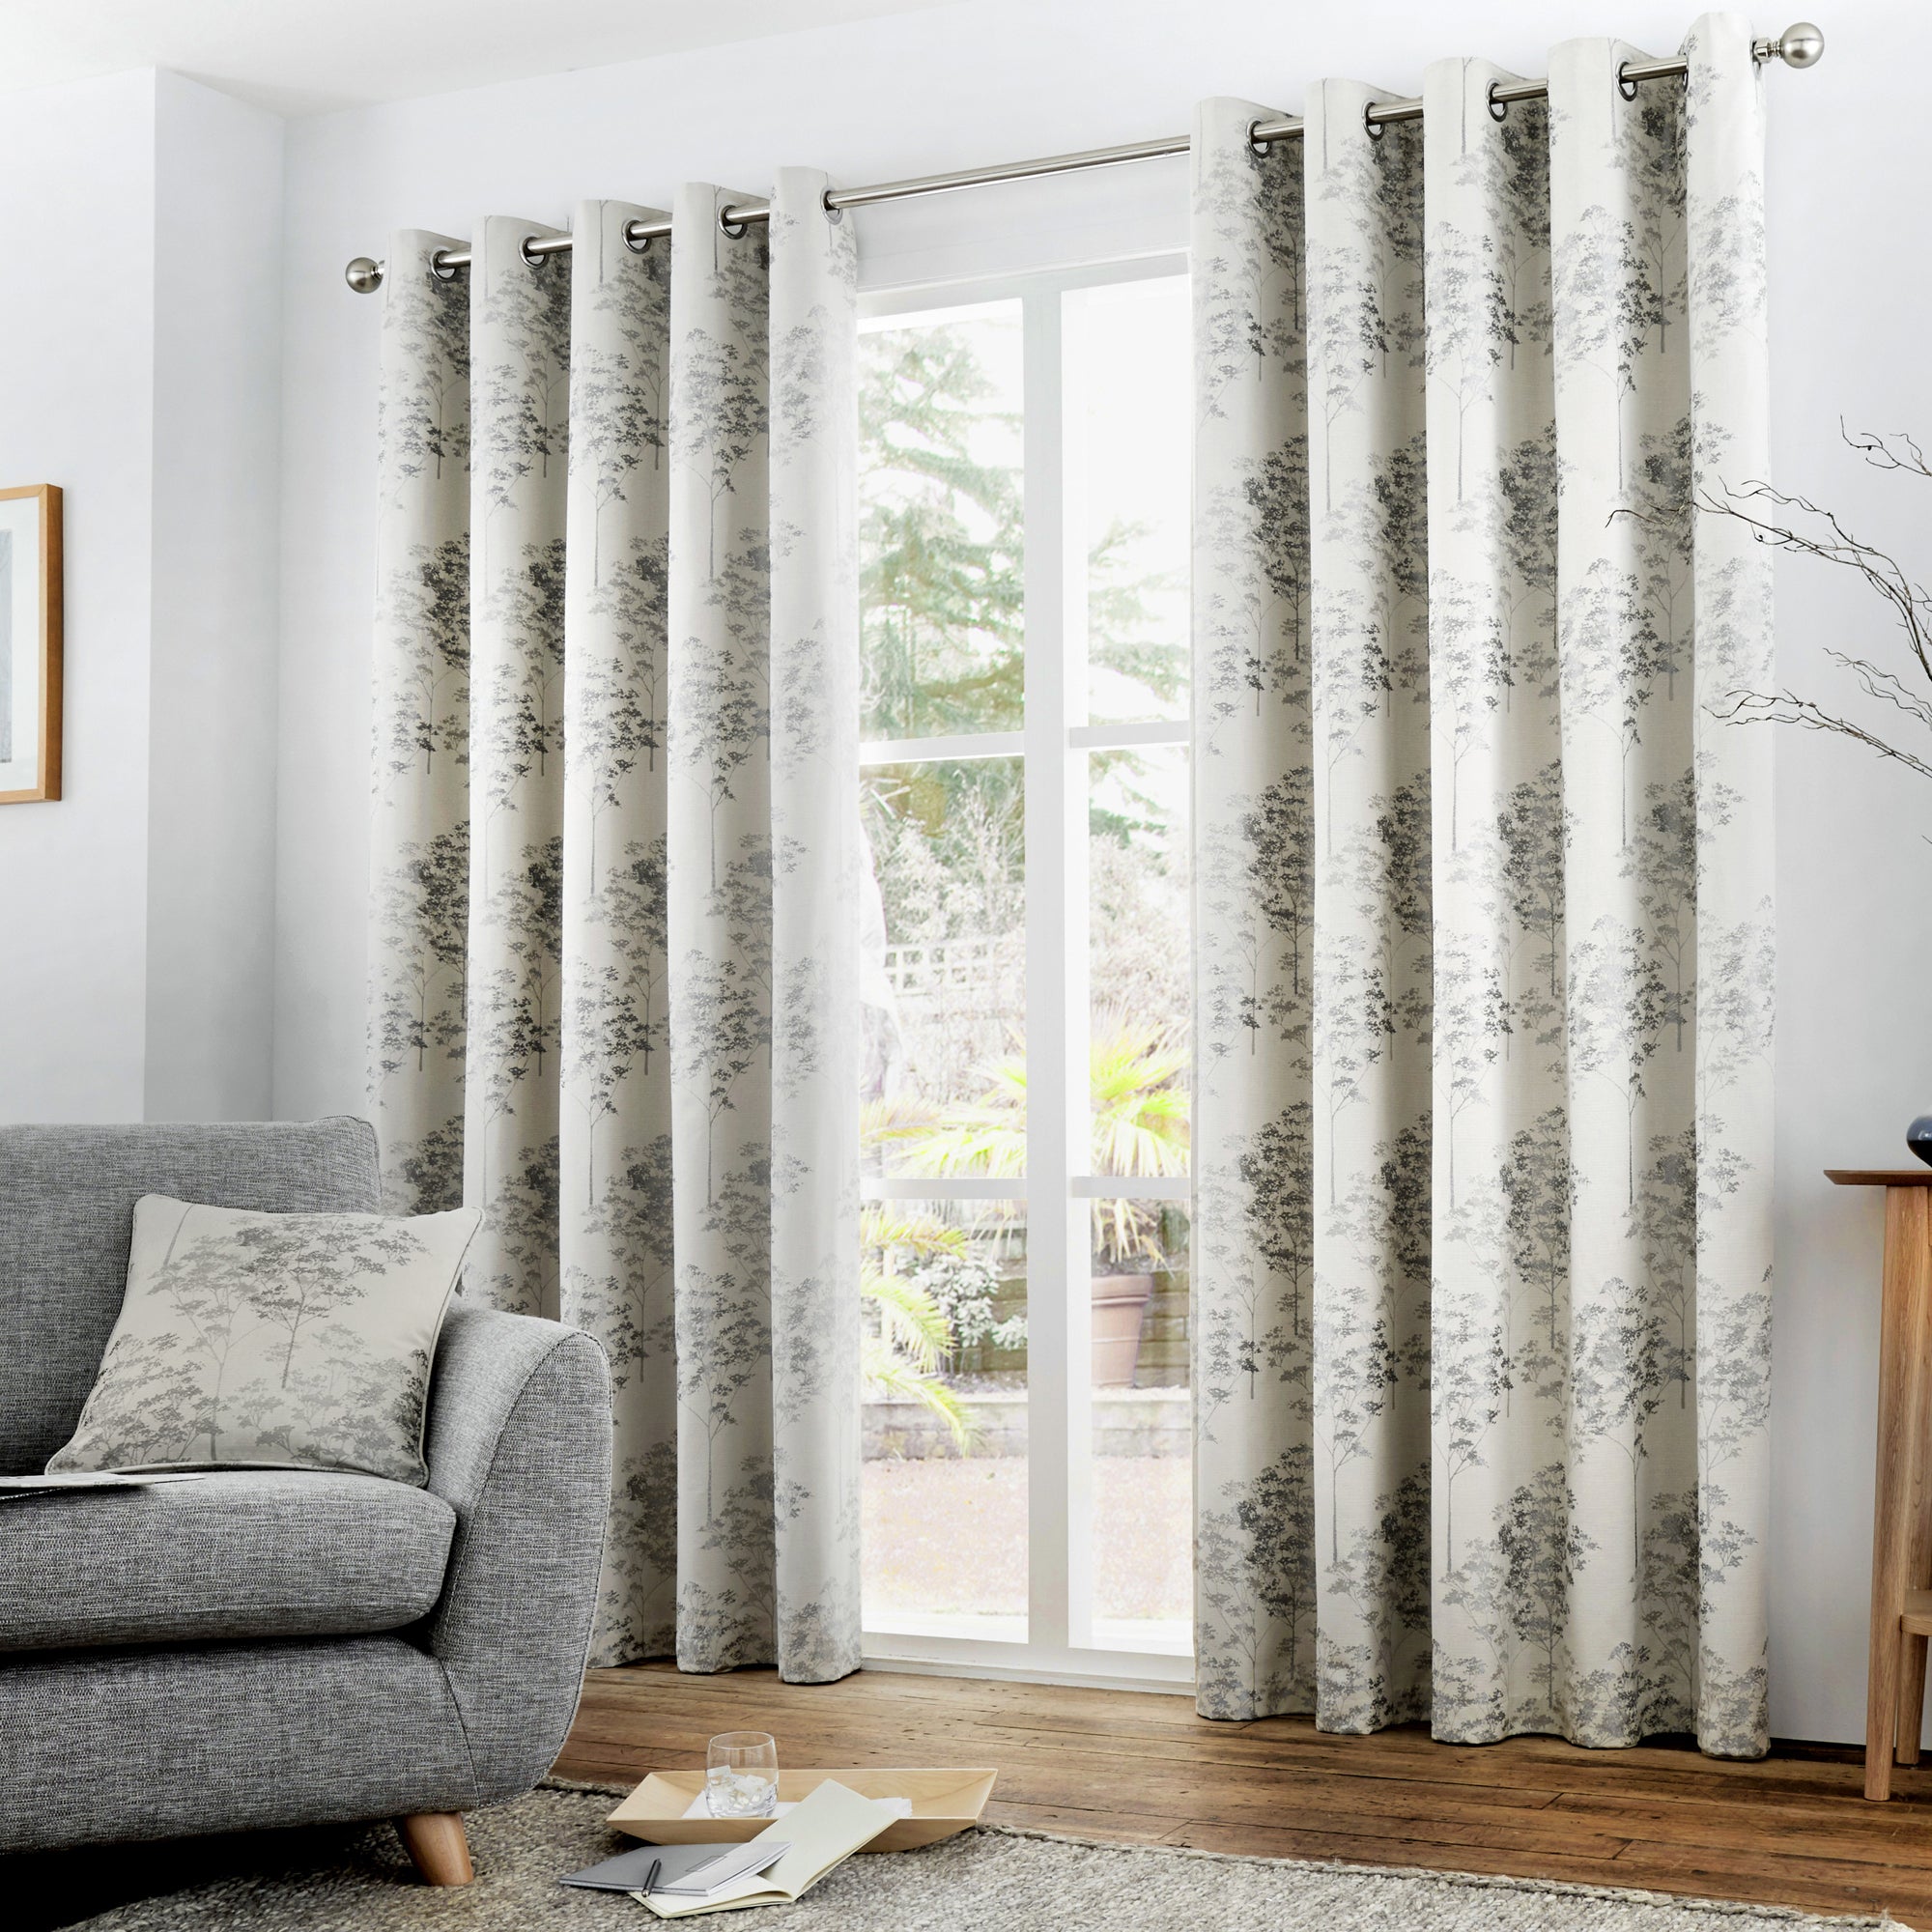 Elmwood - Lined Eyelet Curtains in Silver by Curtina